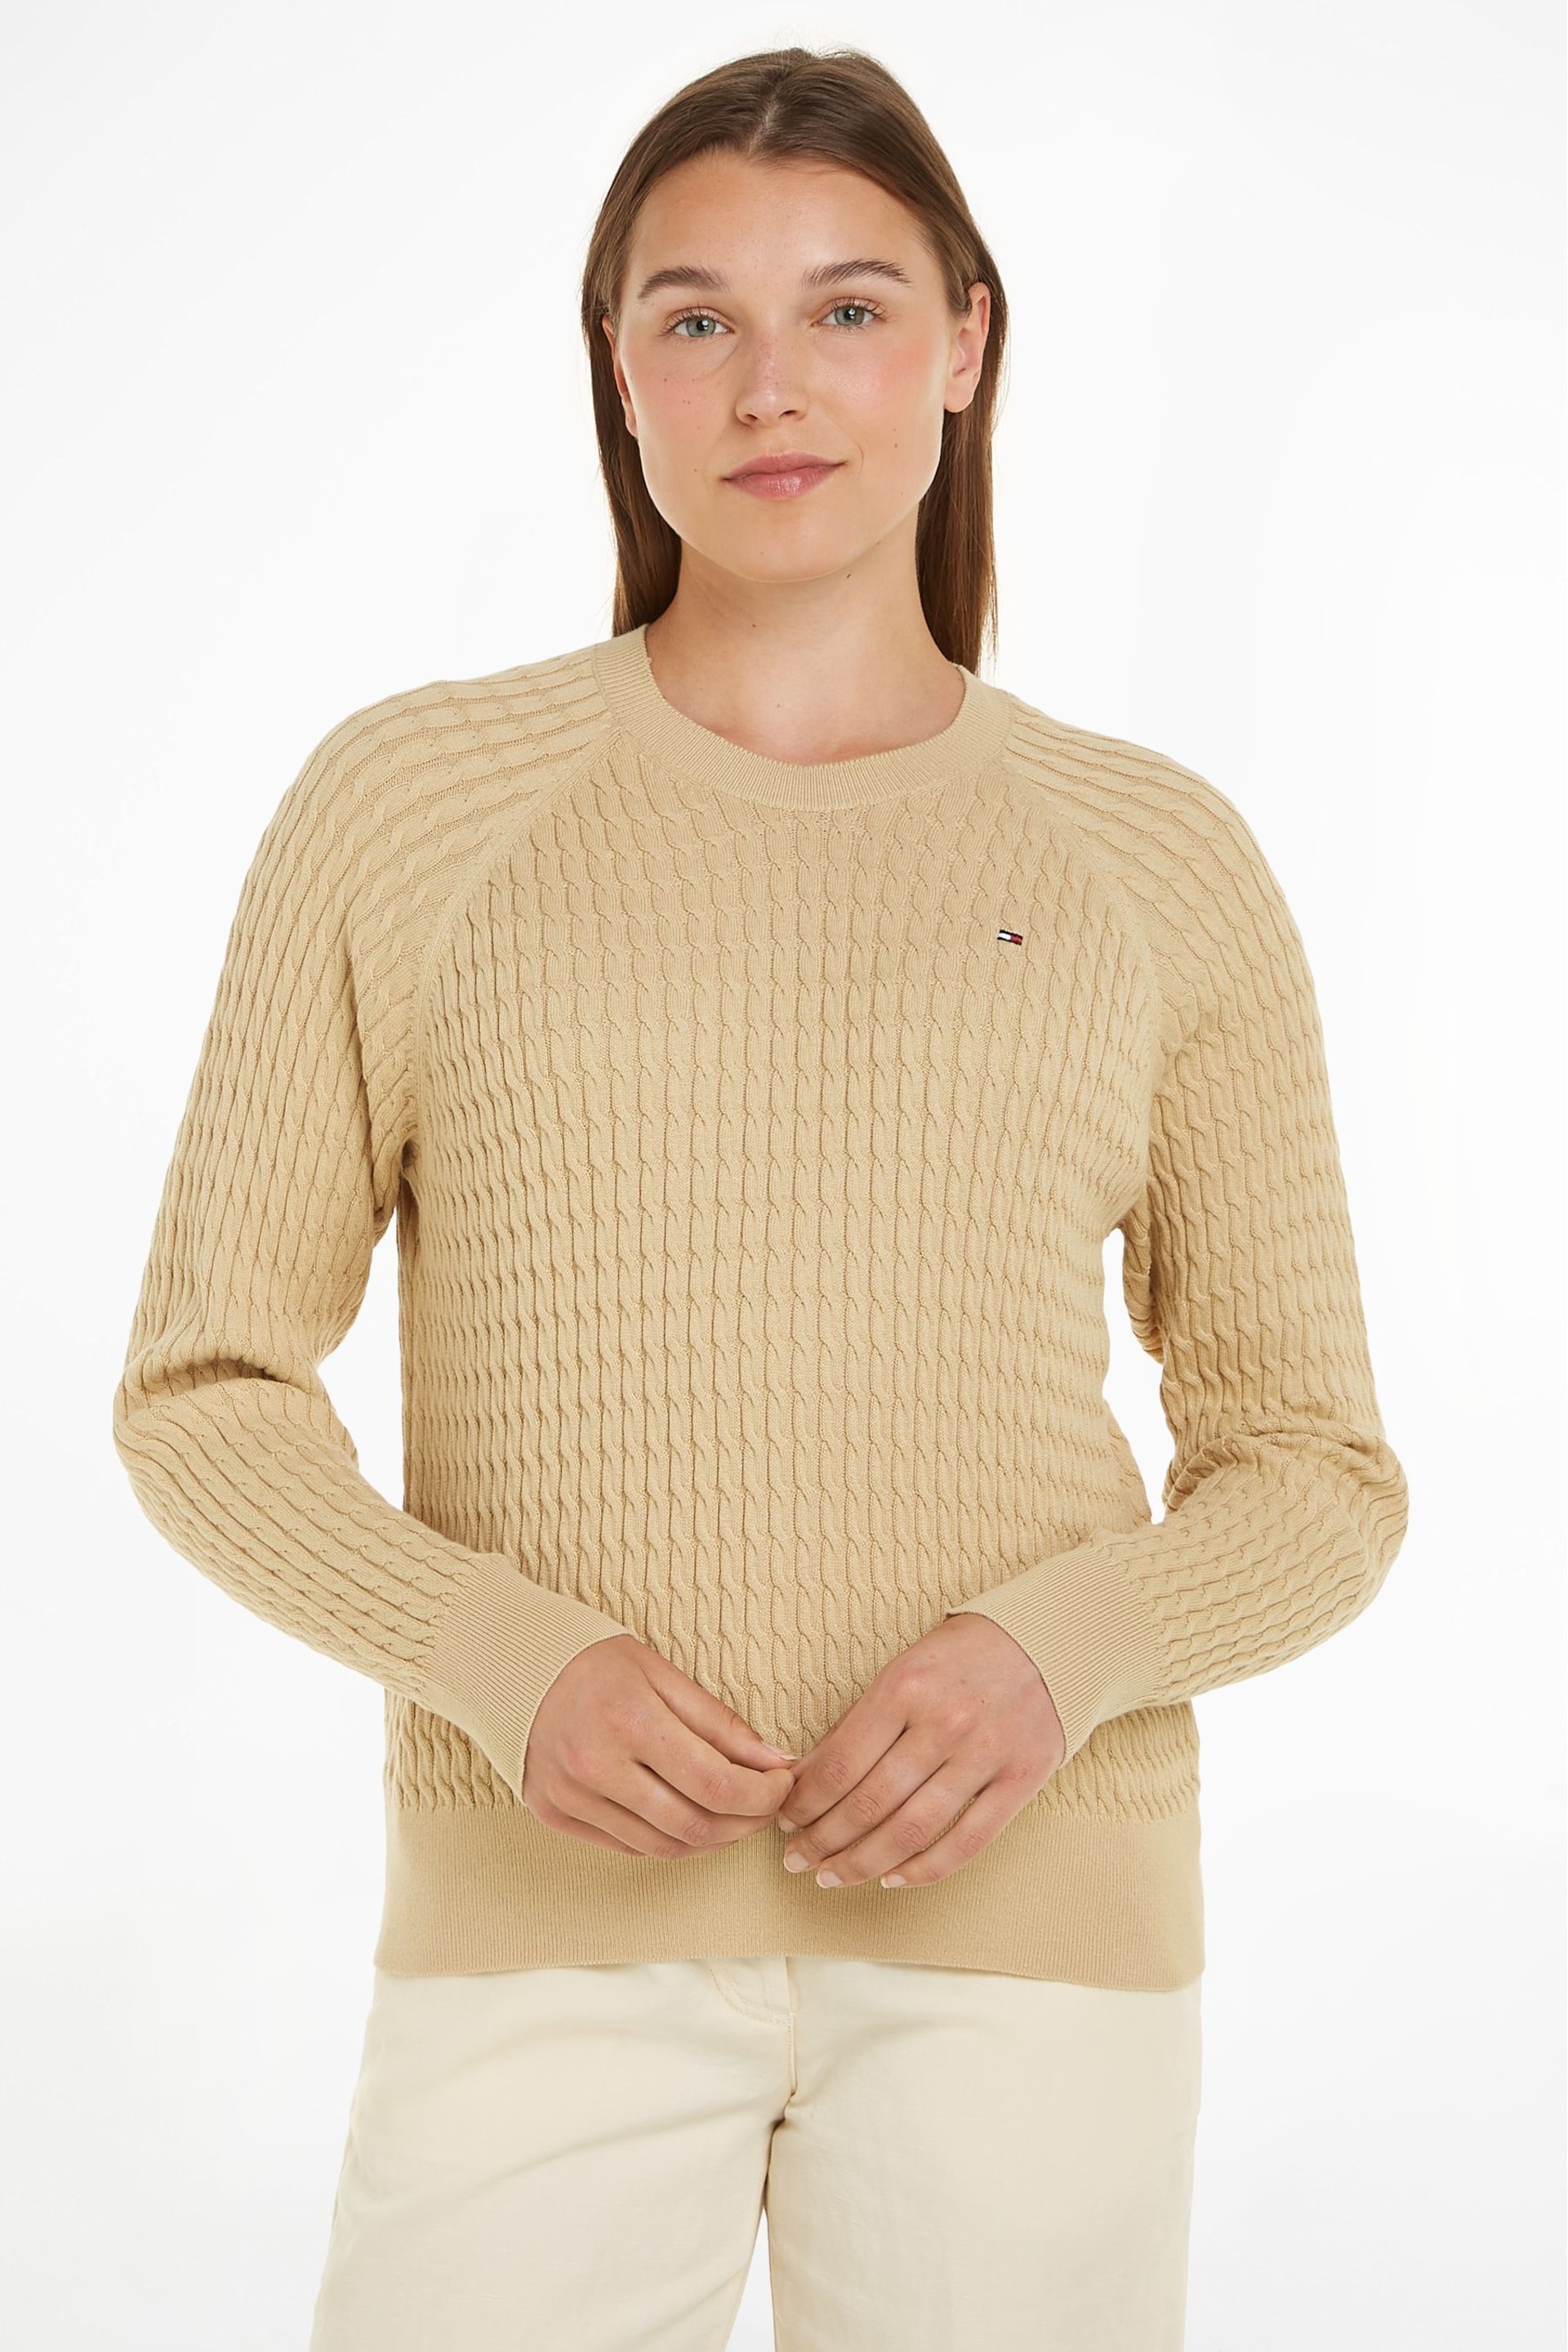 Tommy Hilfiger Blue Cable Knit Sweater - Image 1 of 4